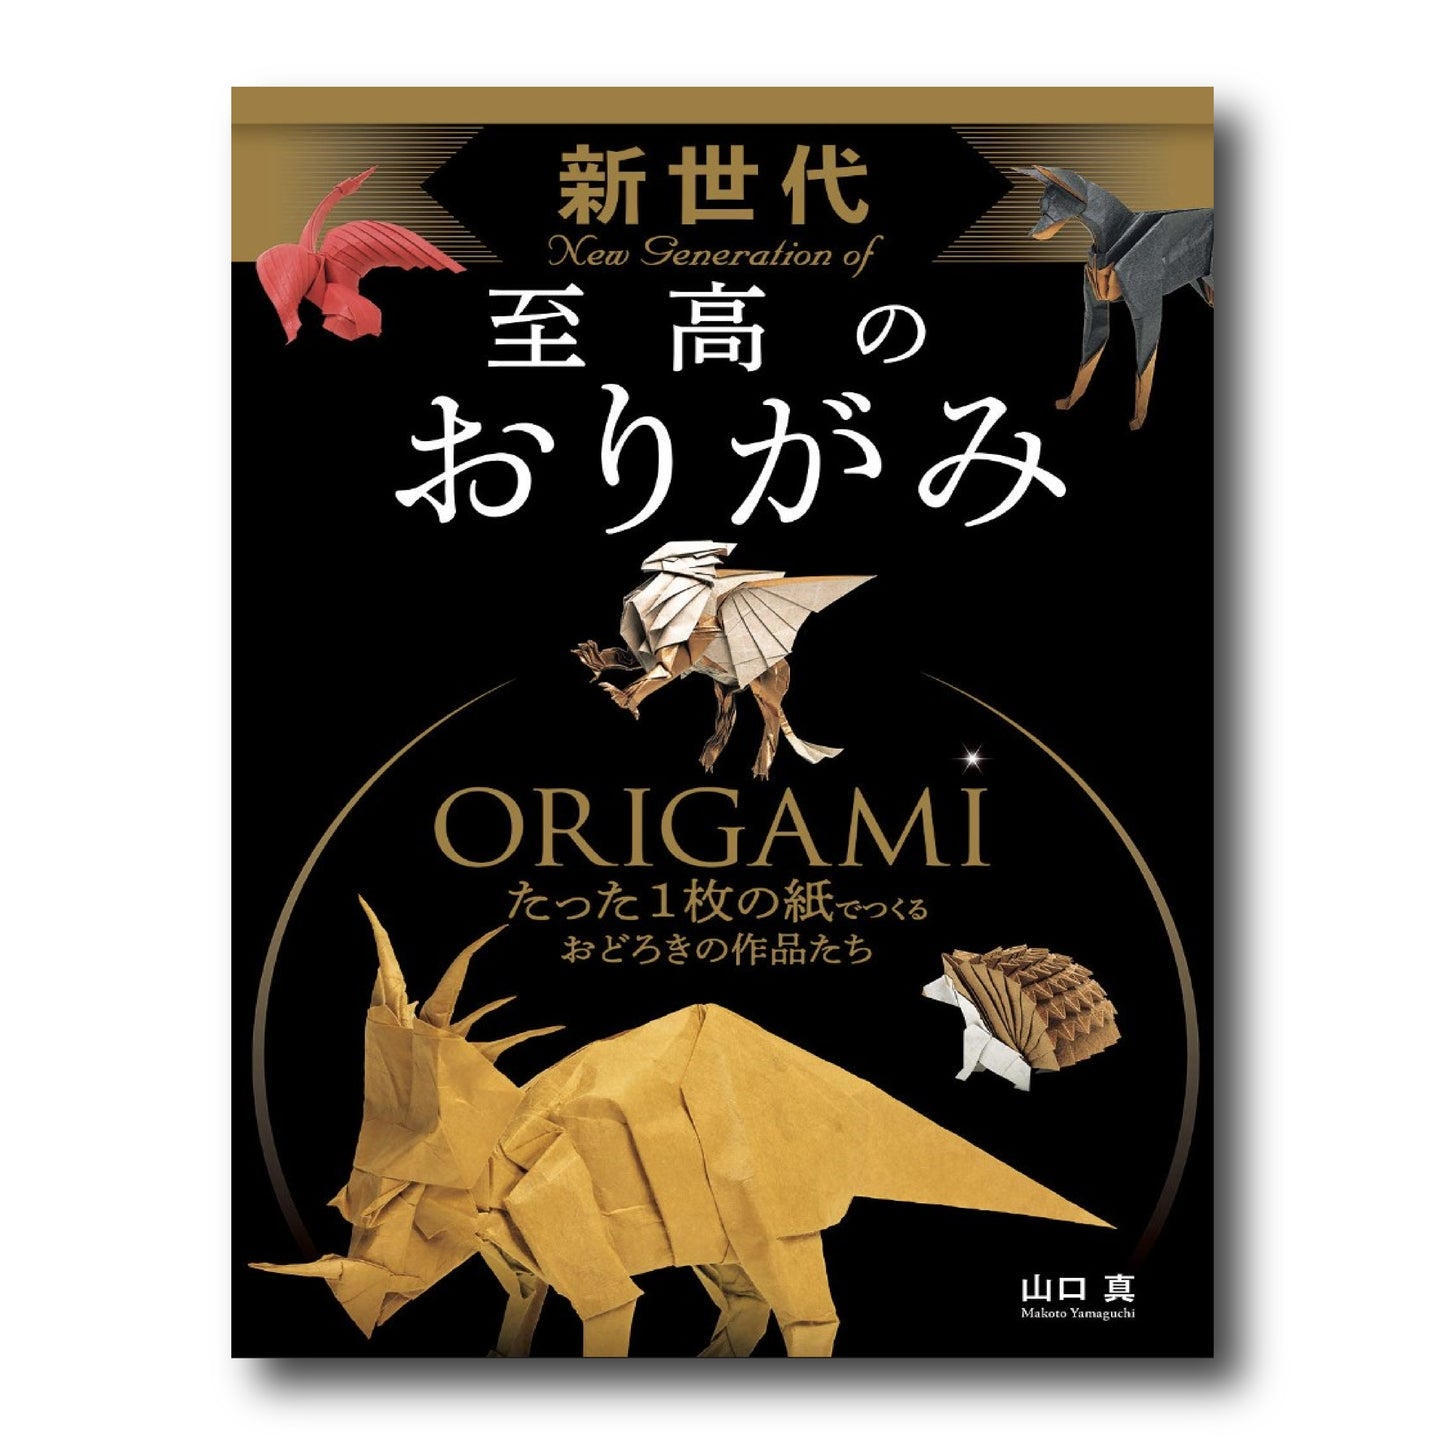 New Generation of Origami/新世代 至高のおりがみ (Japanese Edition)